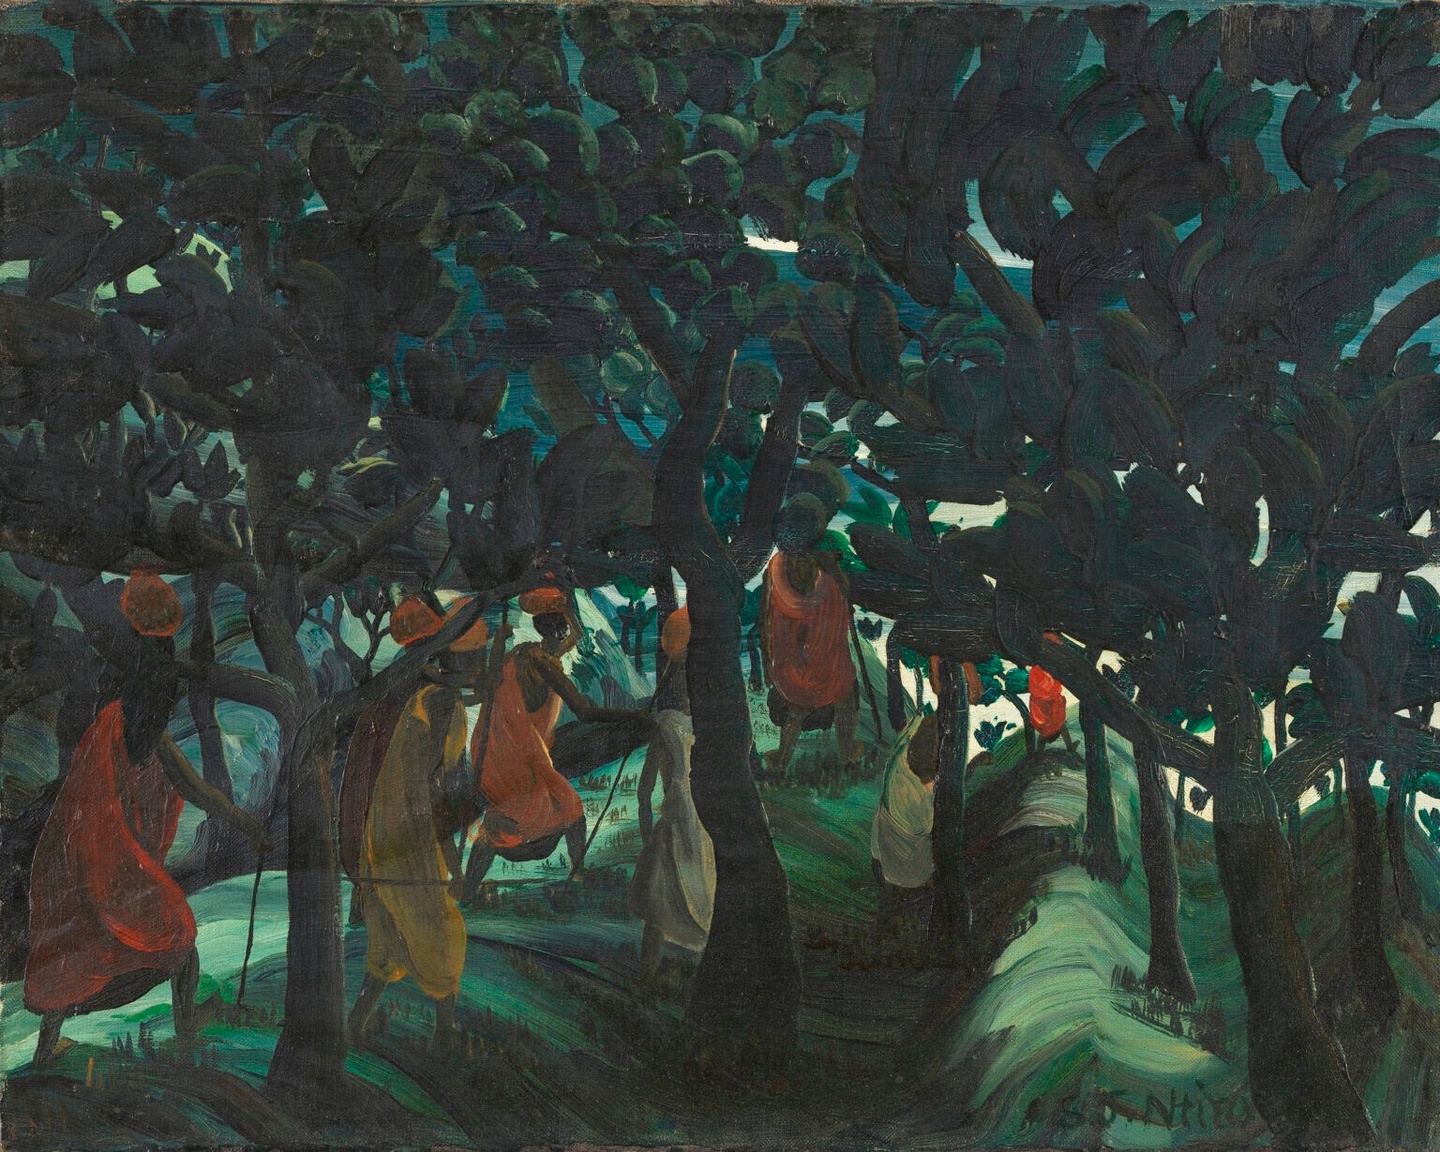 Sam Joseph Ntiro, “Men Taking Banana Beer to Bride by Night,” 1956. Oil on canvas, 16 1/8 x 20 inches. Museum of Modern Art, New York, Elizabeth Bliss Parkinson Fund. © Museum of Modern Art/Licensed by SCALA/Art Resource, NY. (Courtesy of American Federation of Arts)